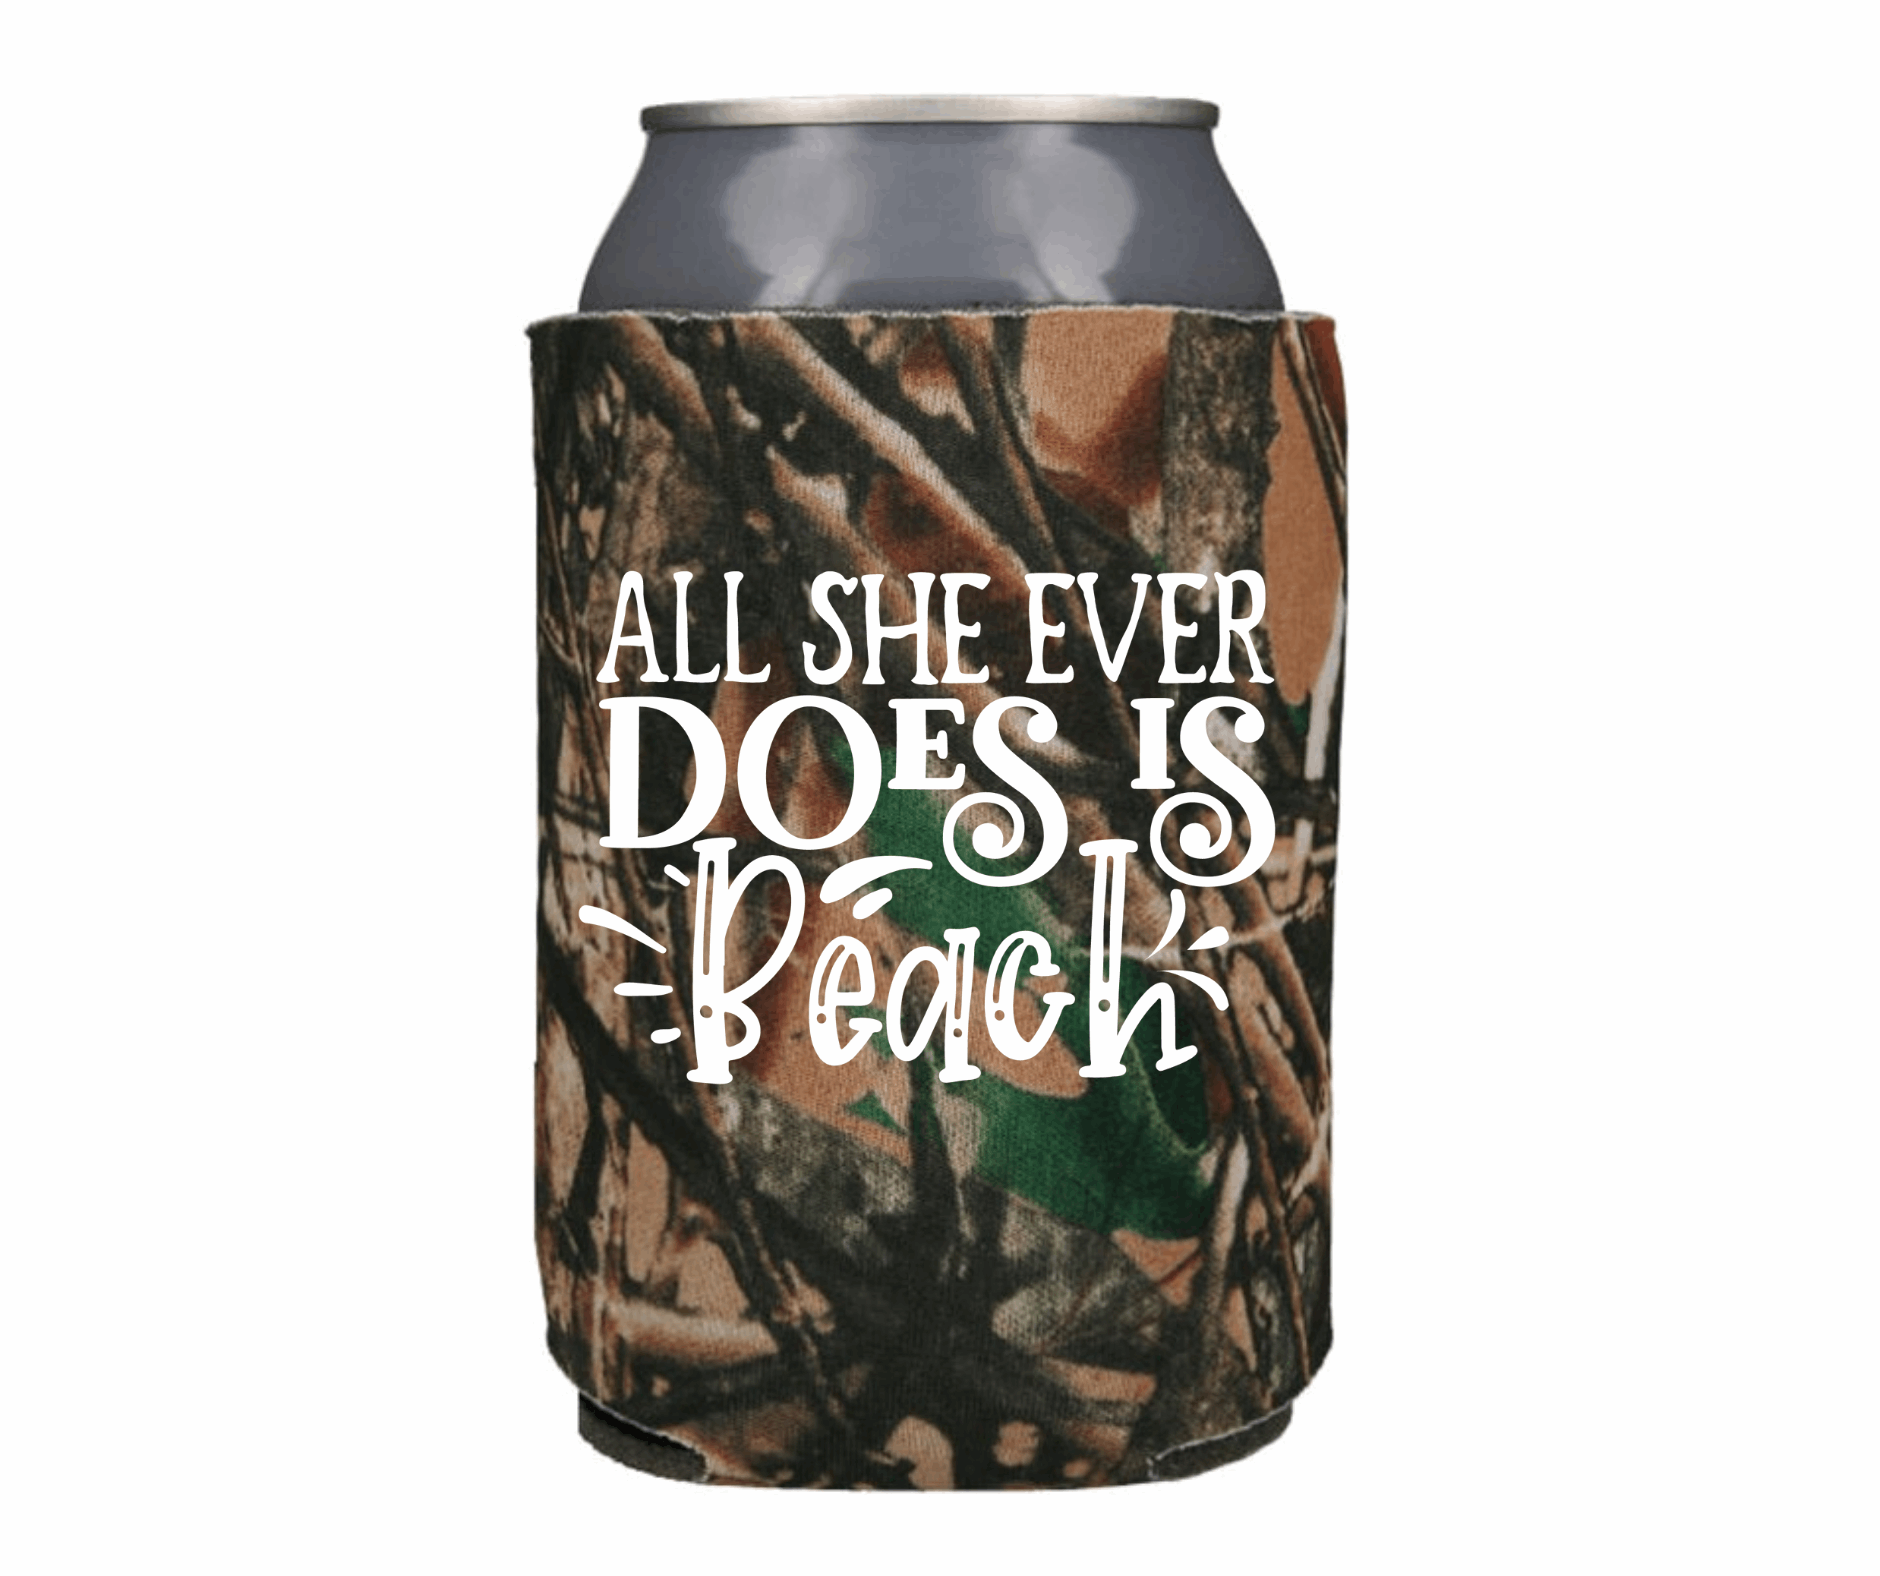 All She Ever Does Is Beach - Can Cooler Koozie 2 - Pack - Mister Snarky's